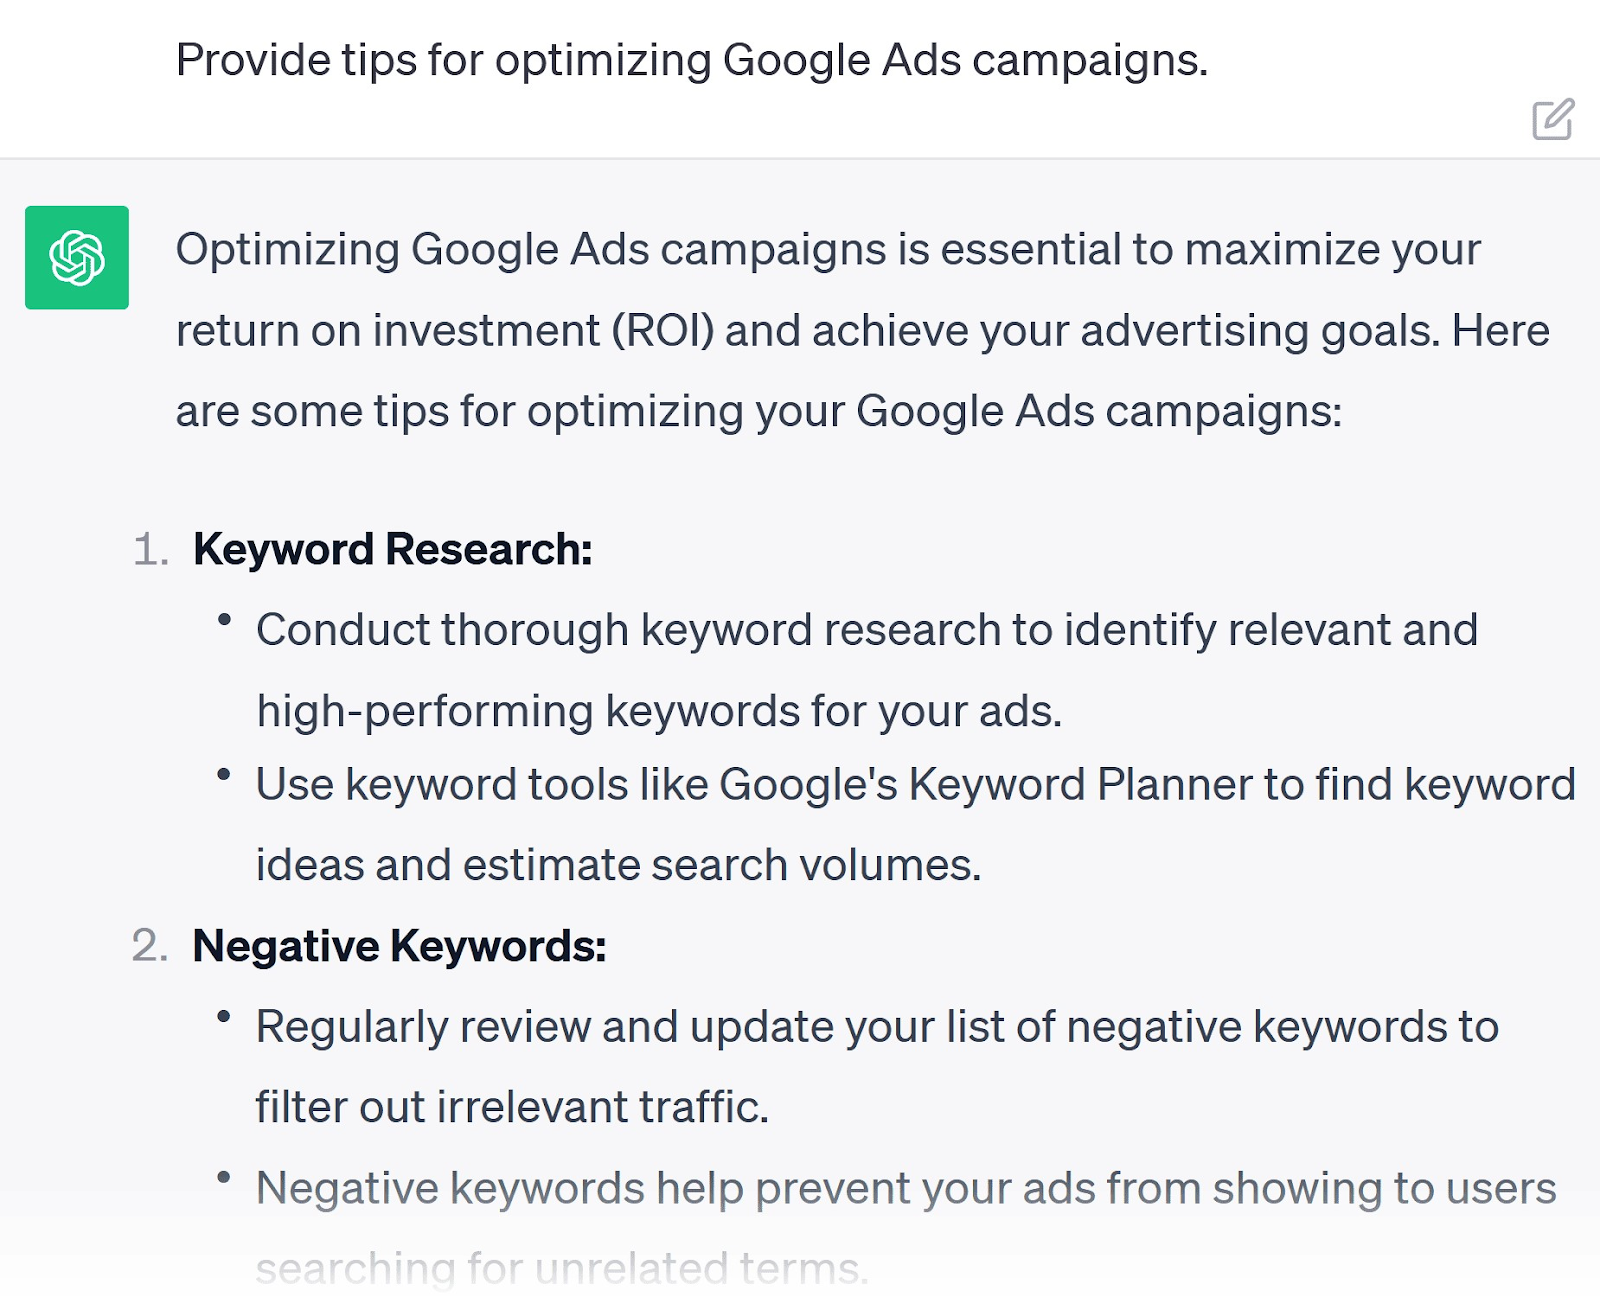 A prompt asking ChatGPT to provide tips for optimizing Google Ads campaigns